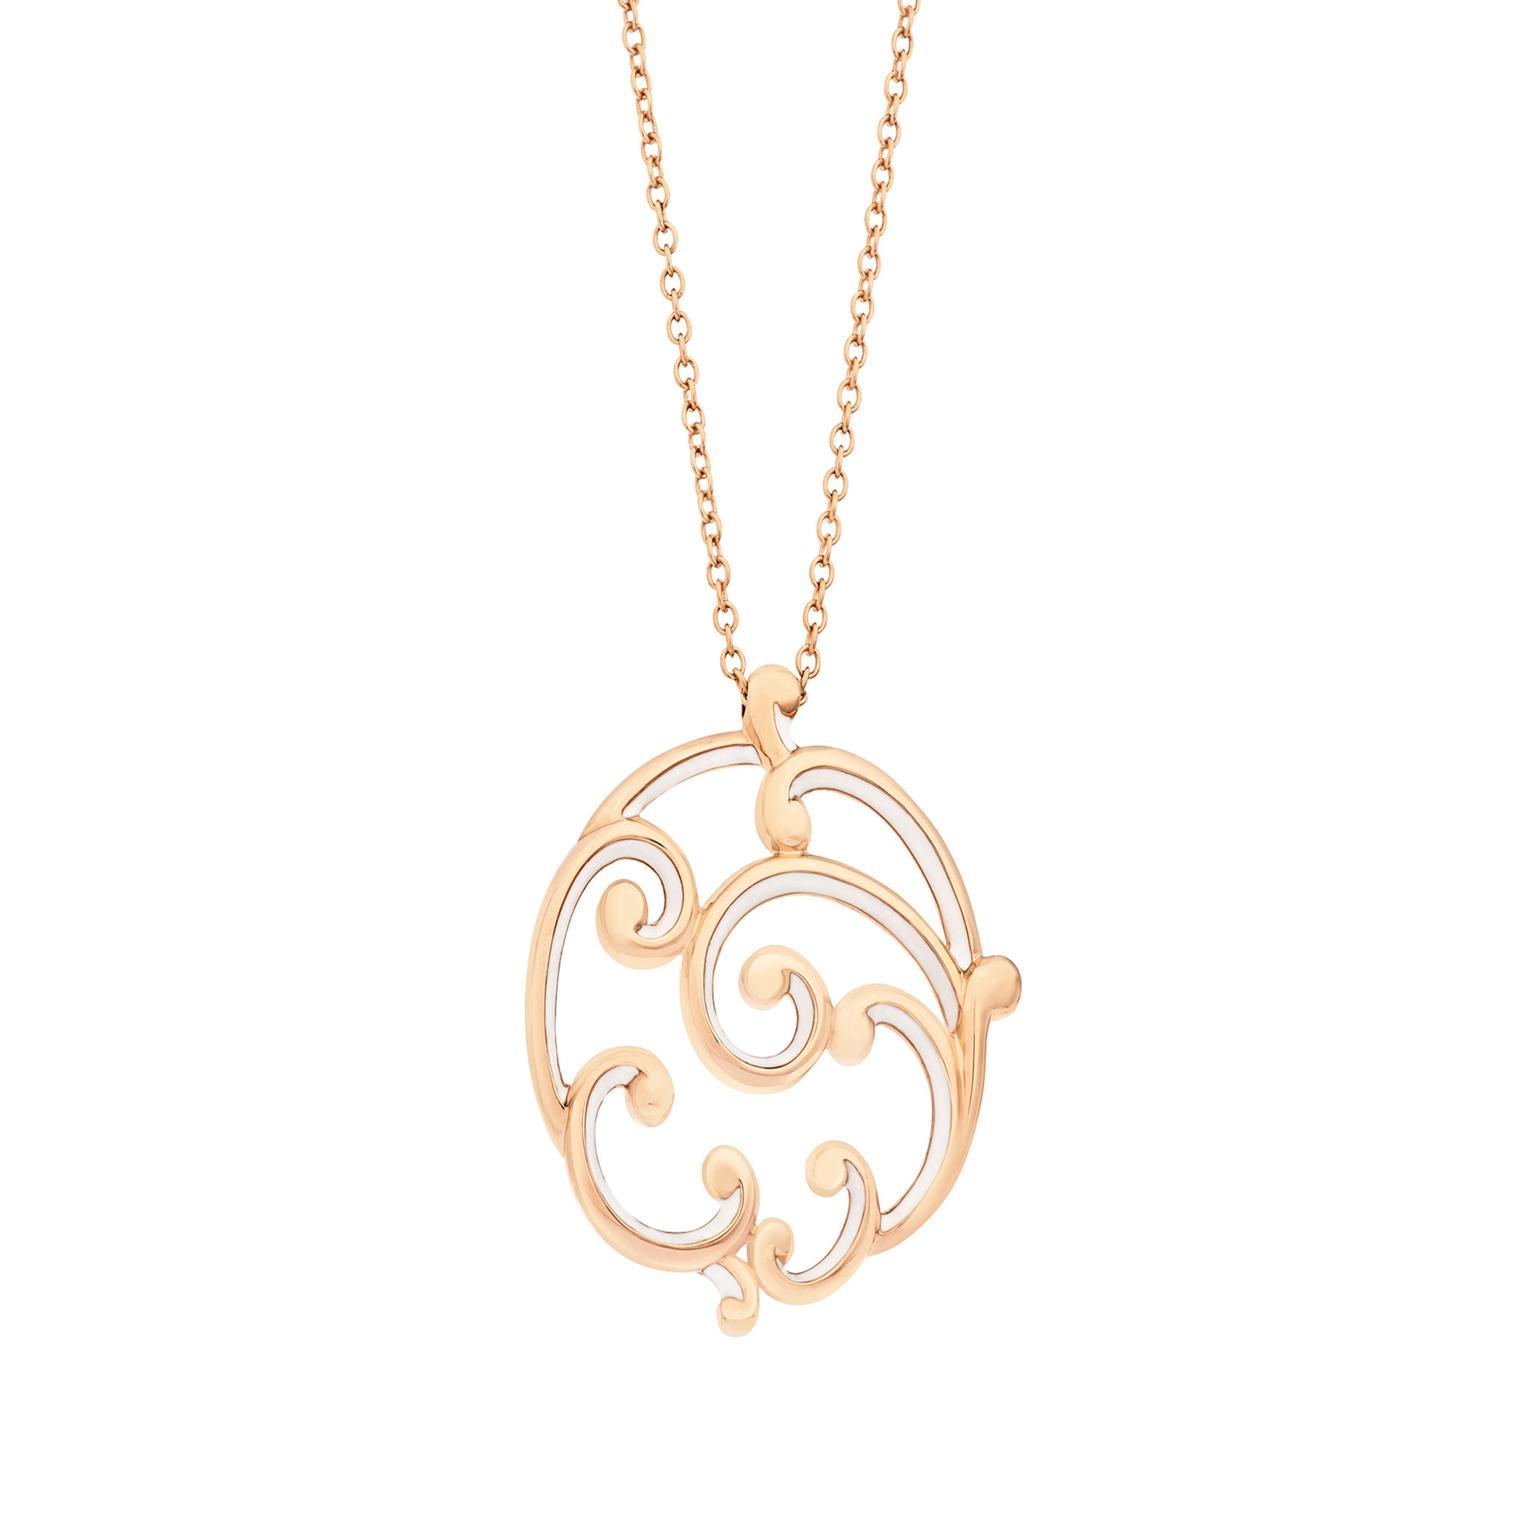 Faberge Rococo rose gold pendant_zoom